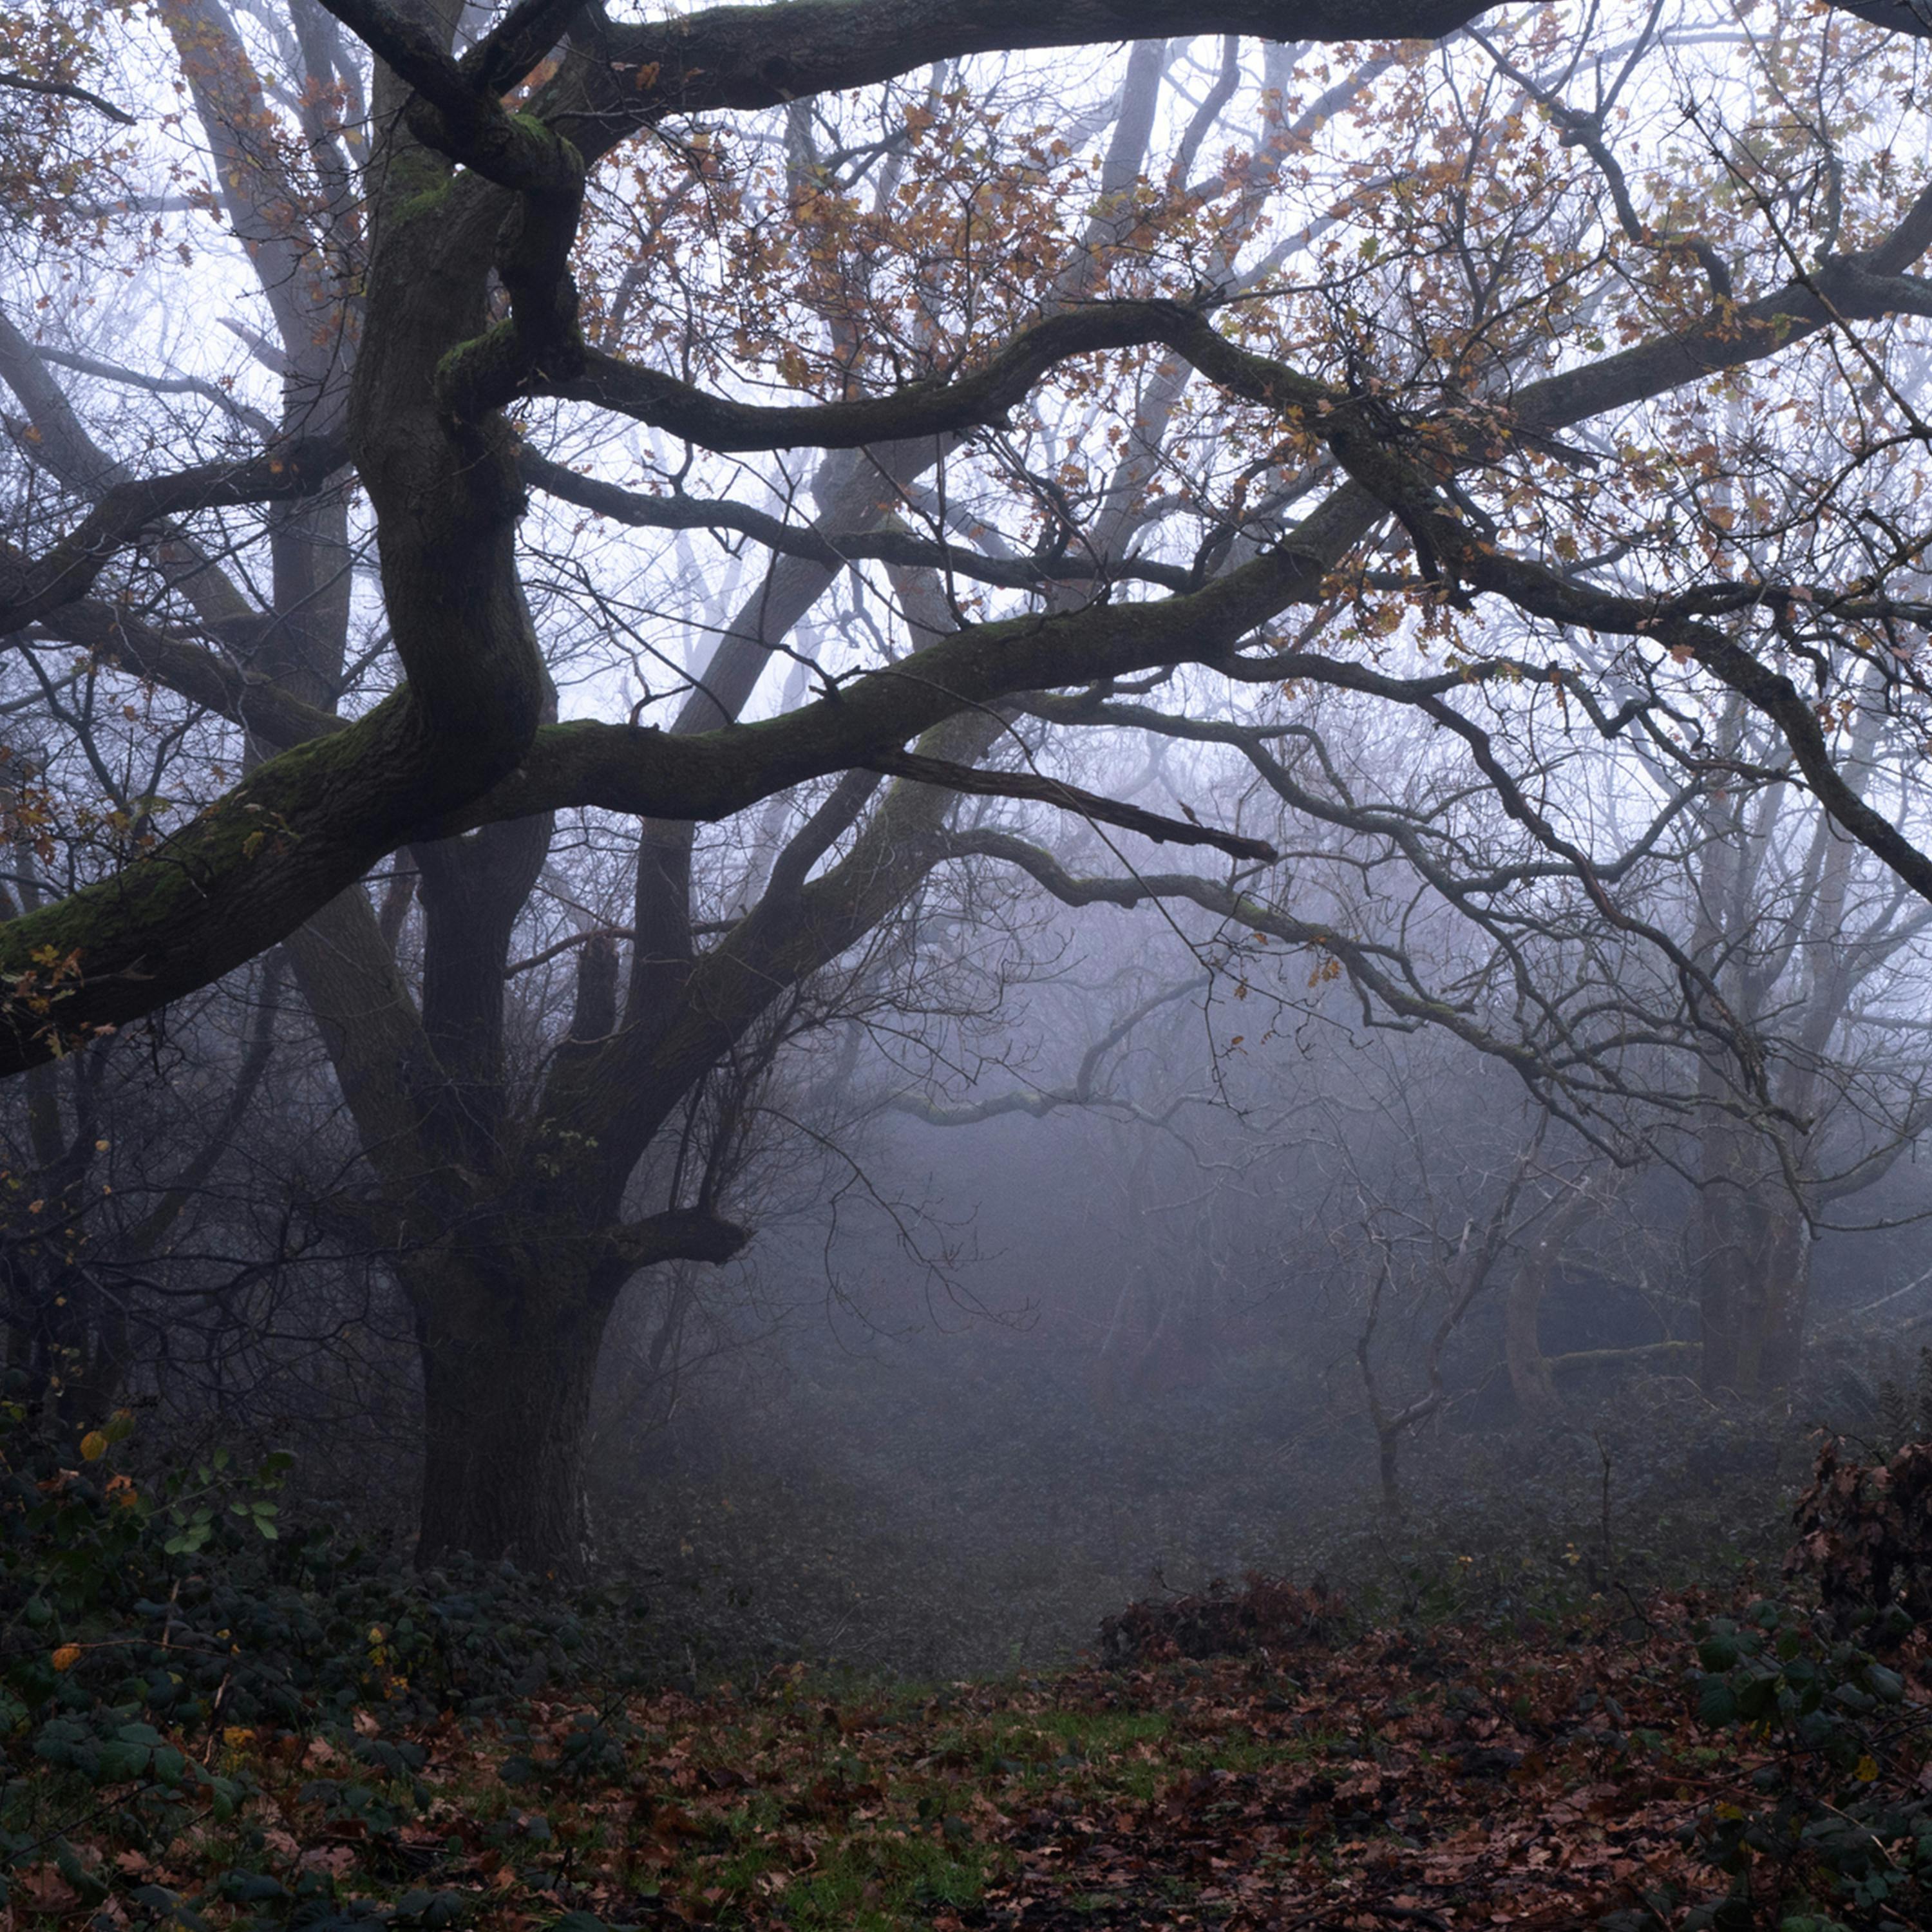 Sound Escape 168. A misty evening in a Lake District forest